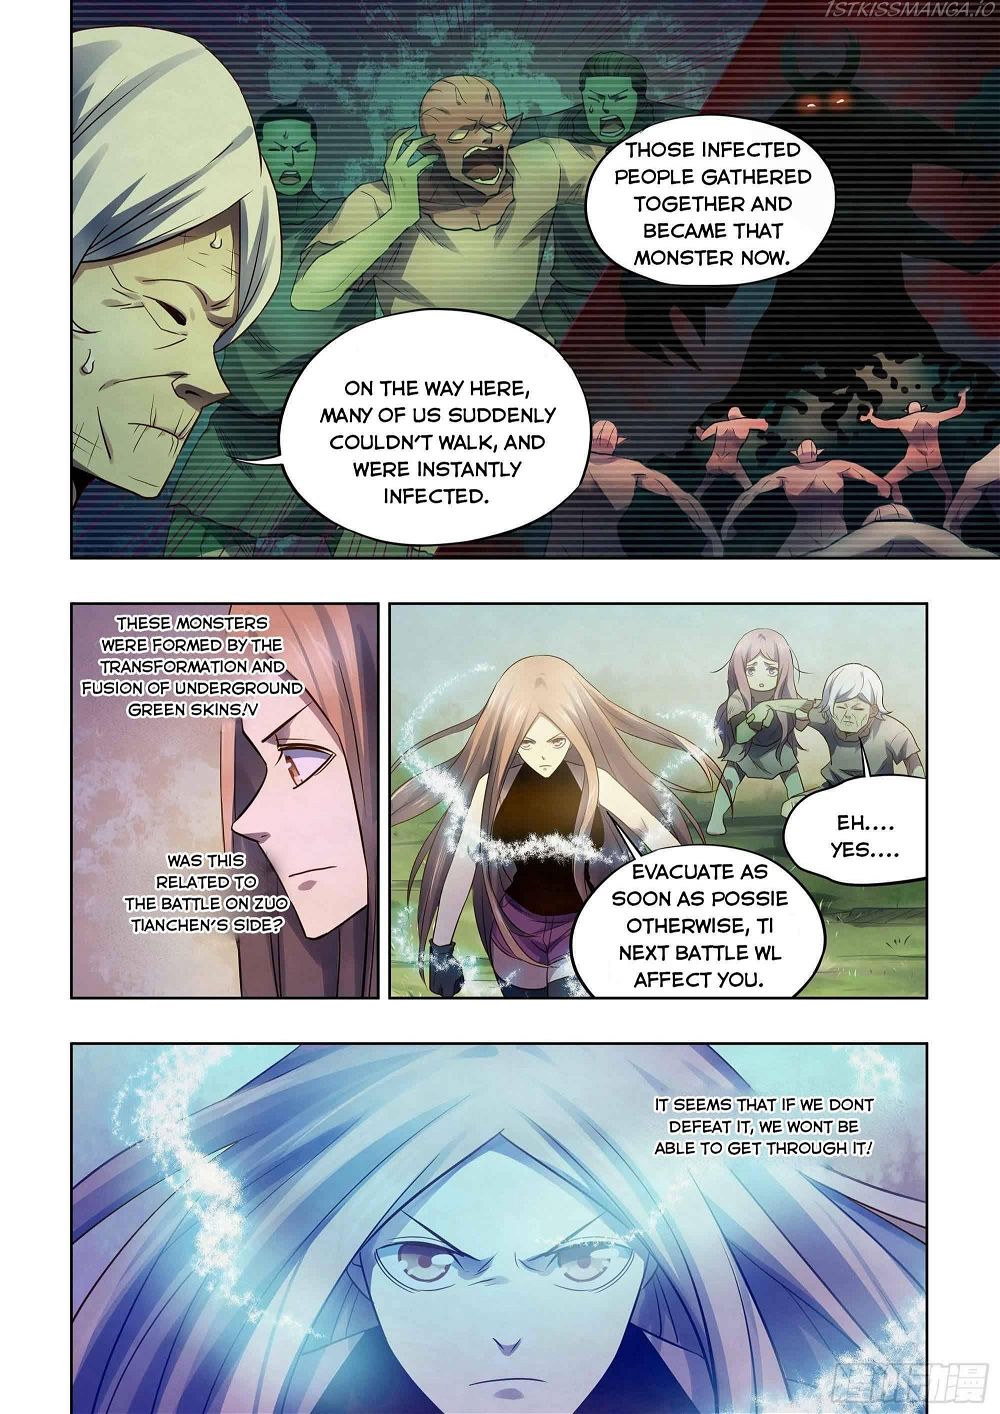 The Last Human Chapter 402 - Page 6